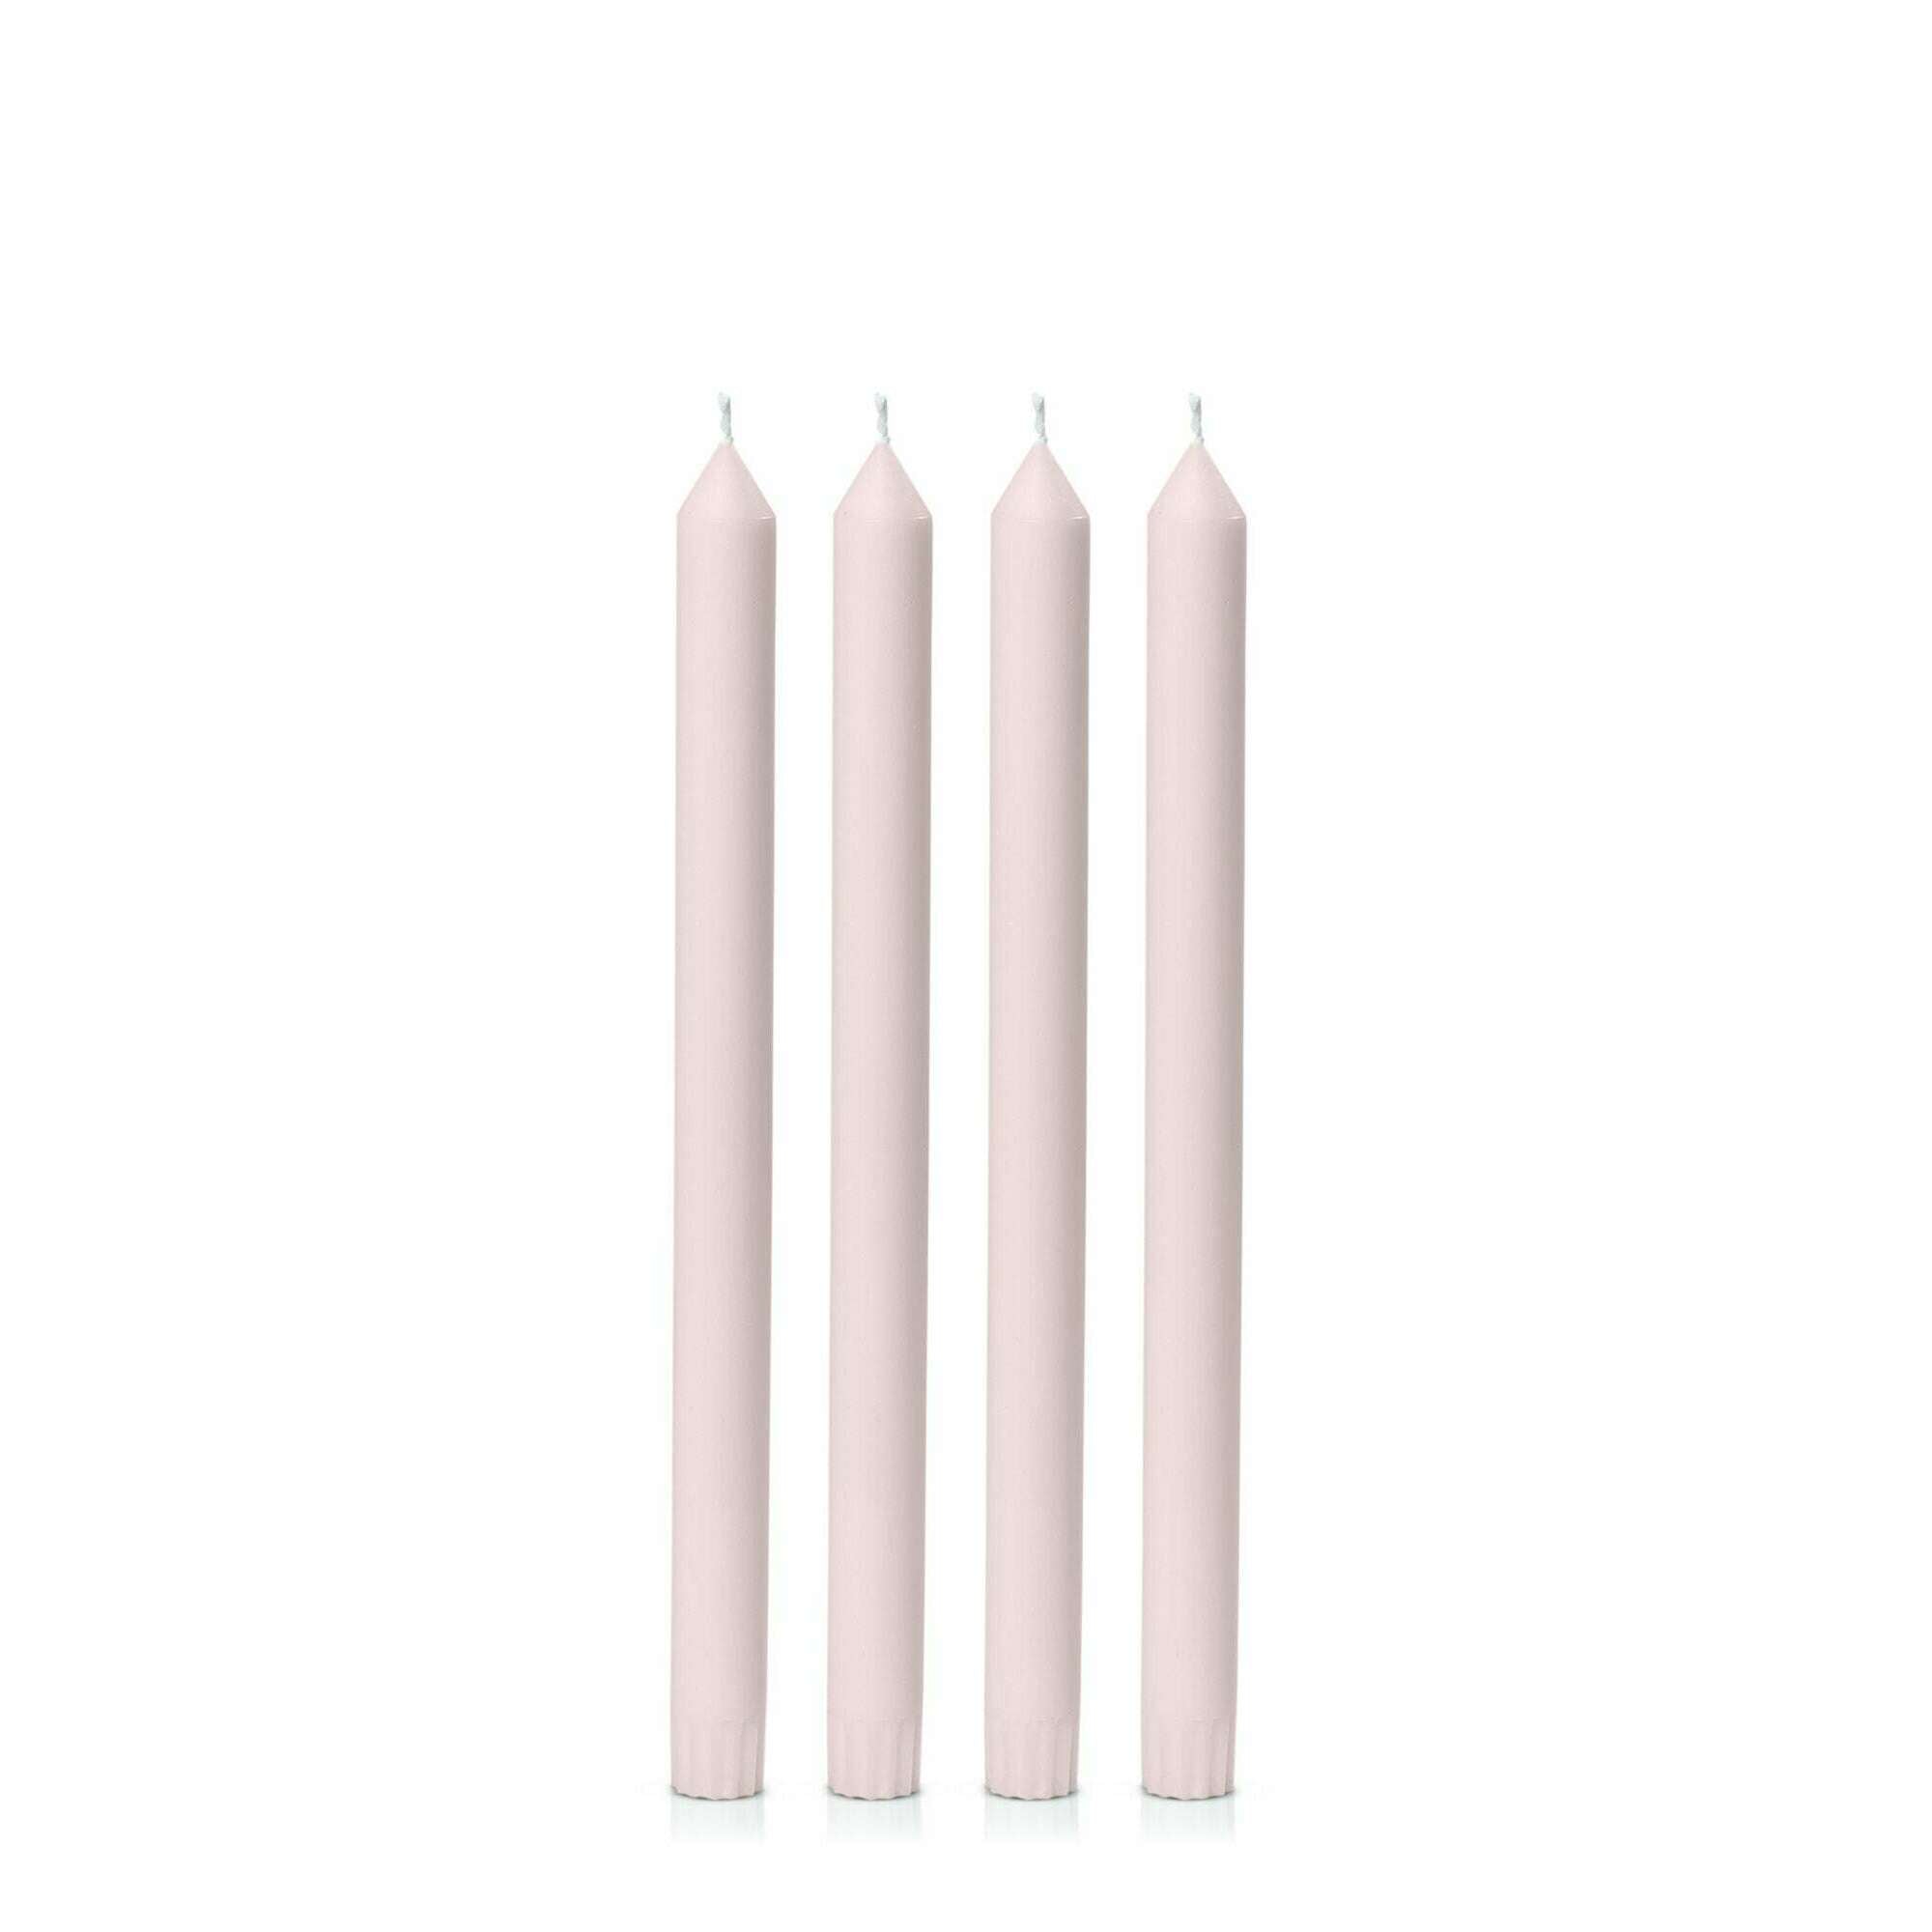 Impodimo Living & Giving:Moreton Eco Dinner Candle - Antique Pink:Candle Co